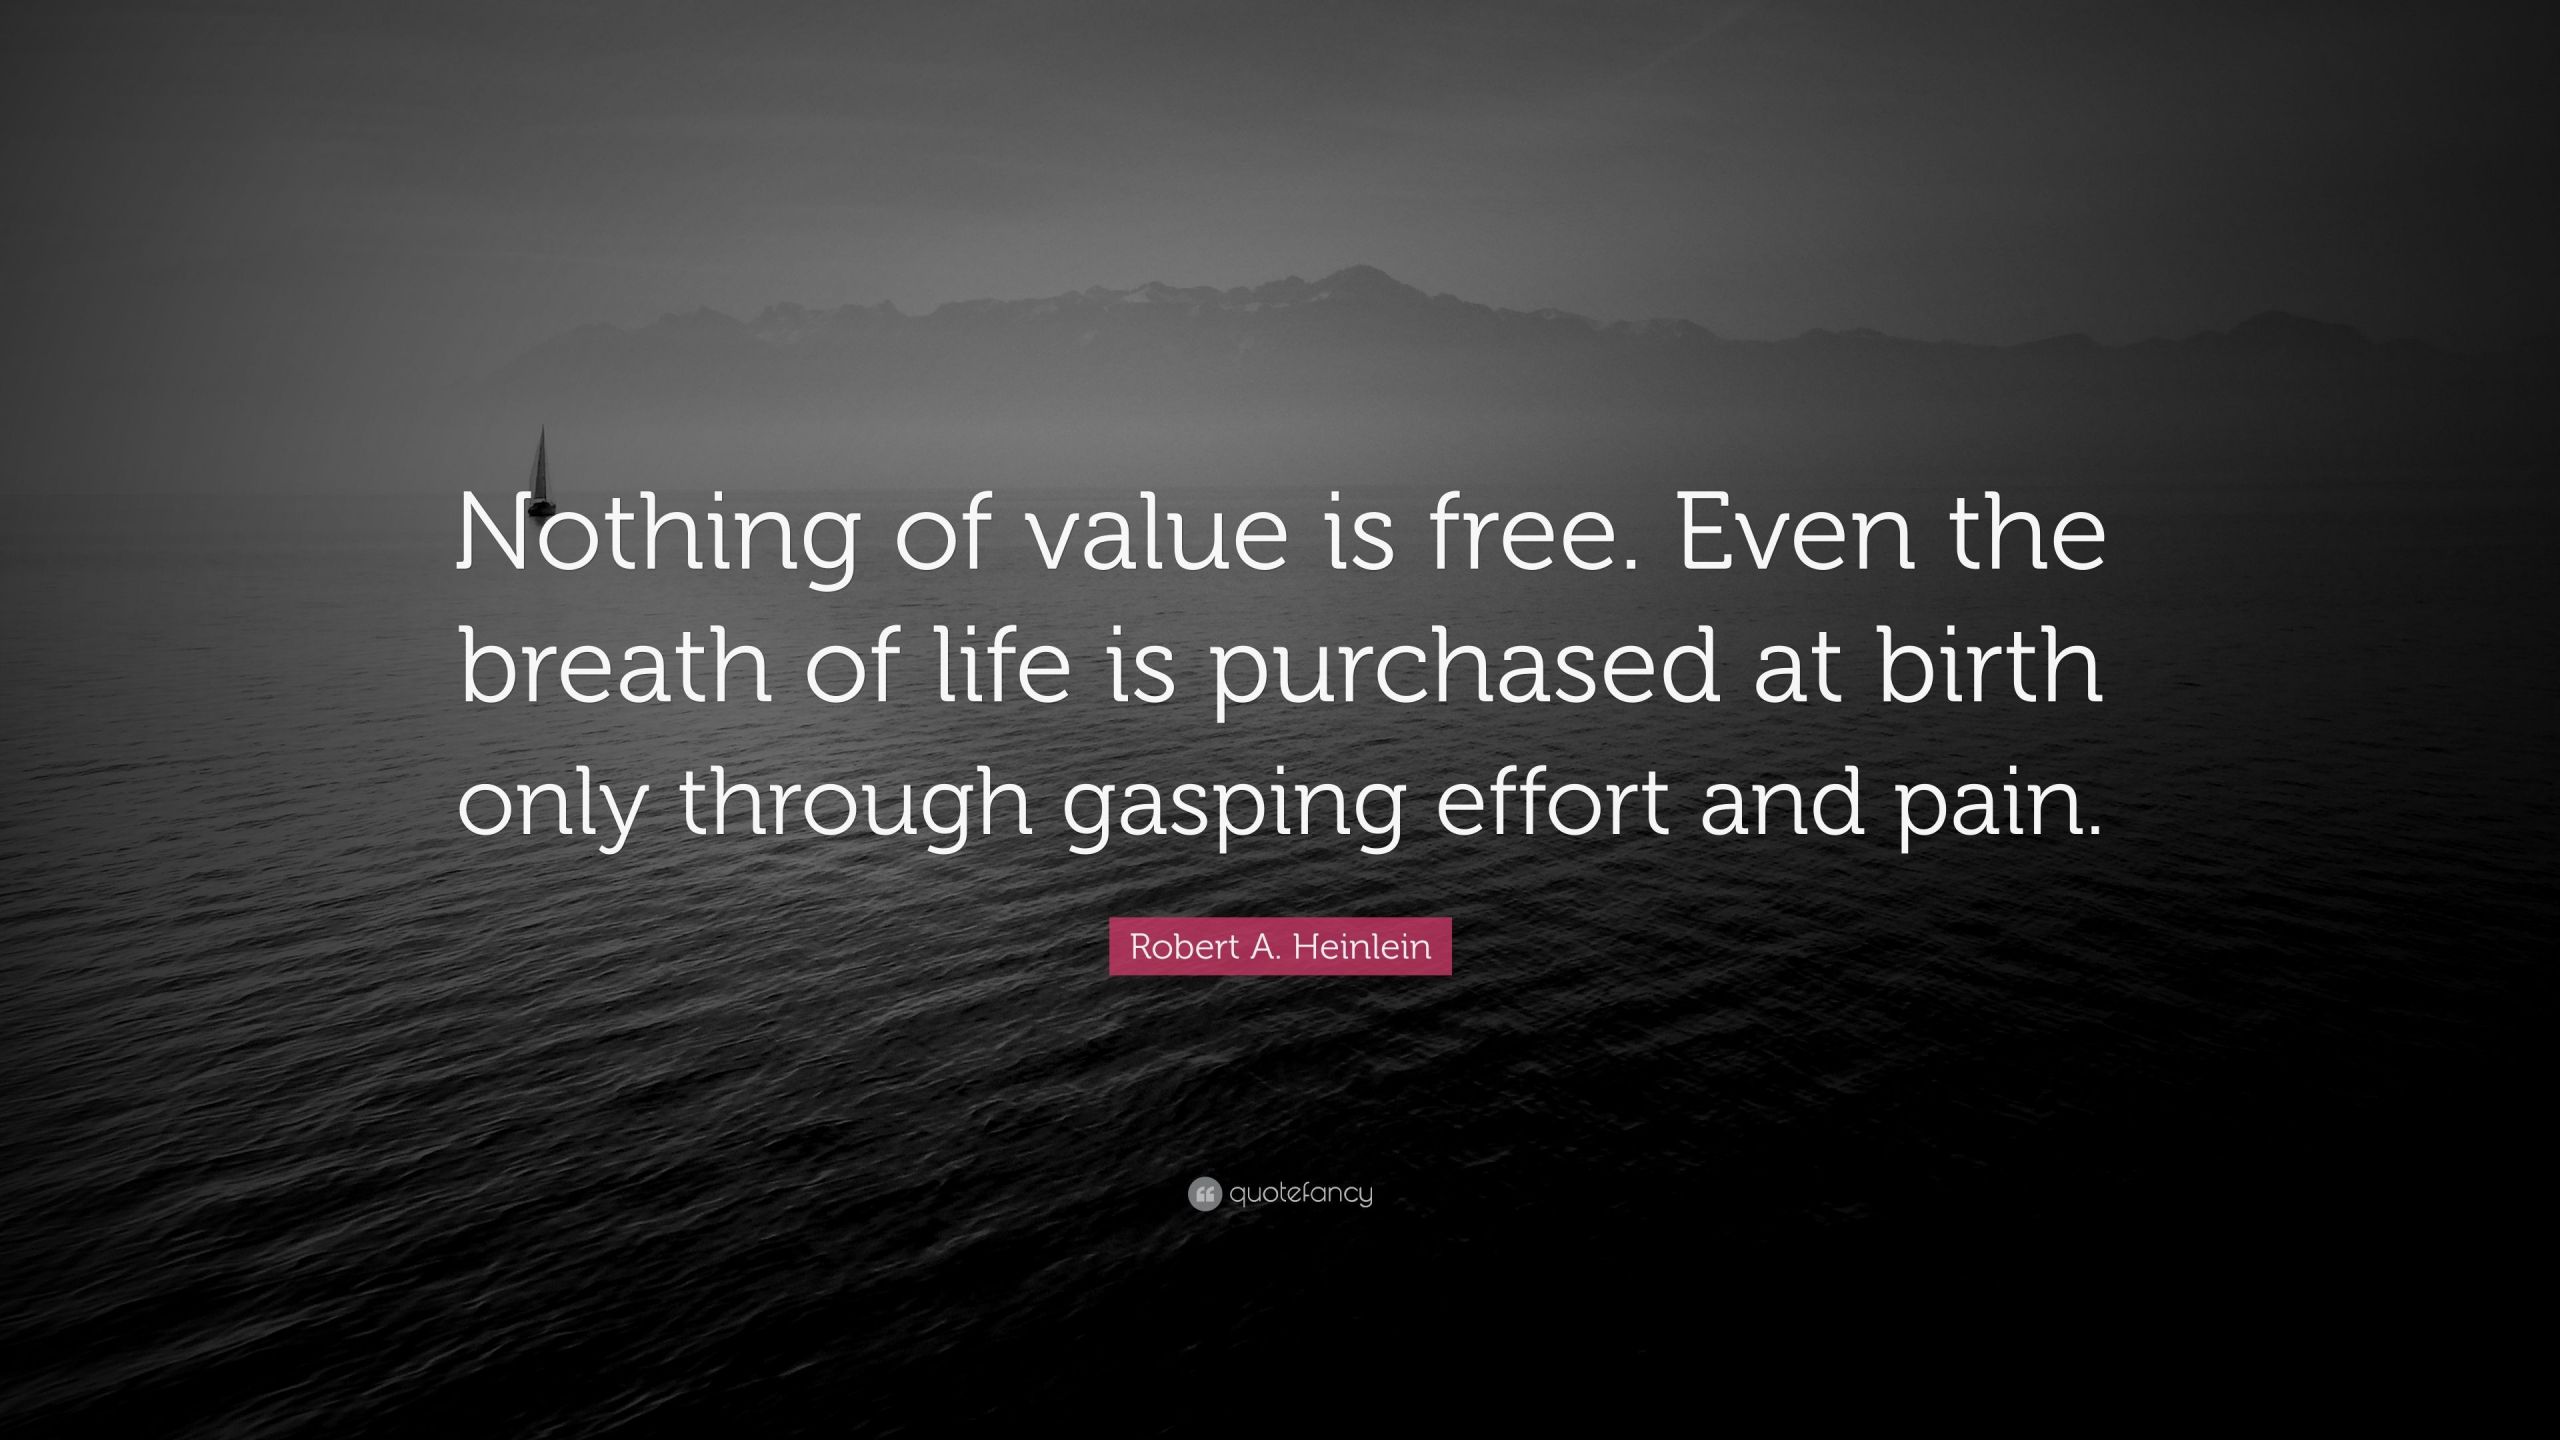 Nothing In Life Is Free Quote
 Robert A Heinlein Quote “Nothing of value is free Even